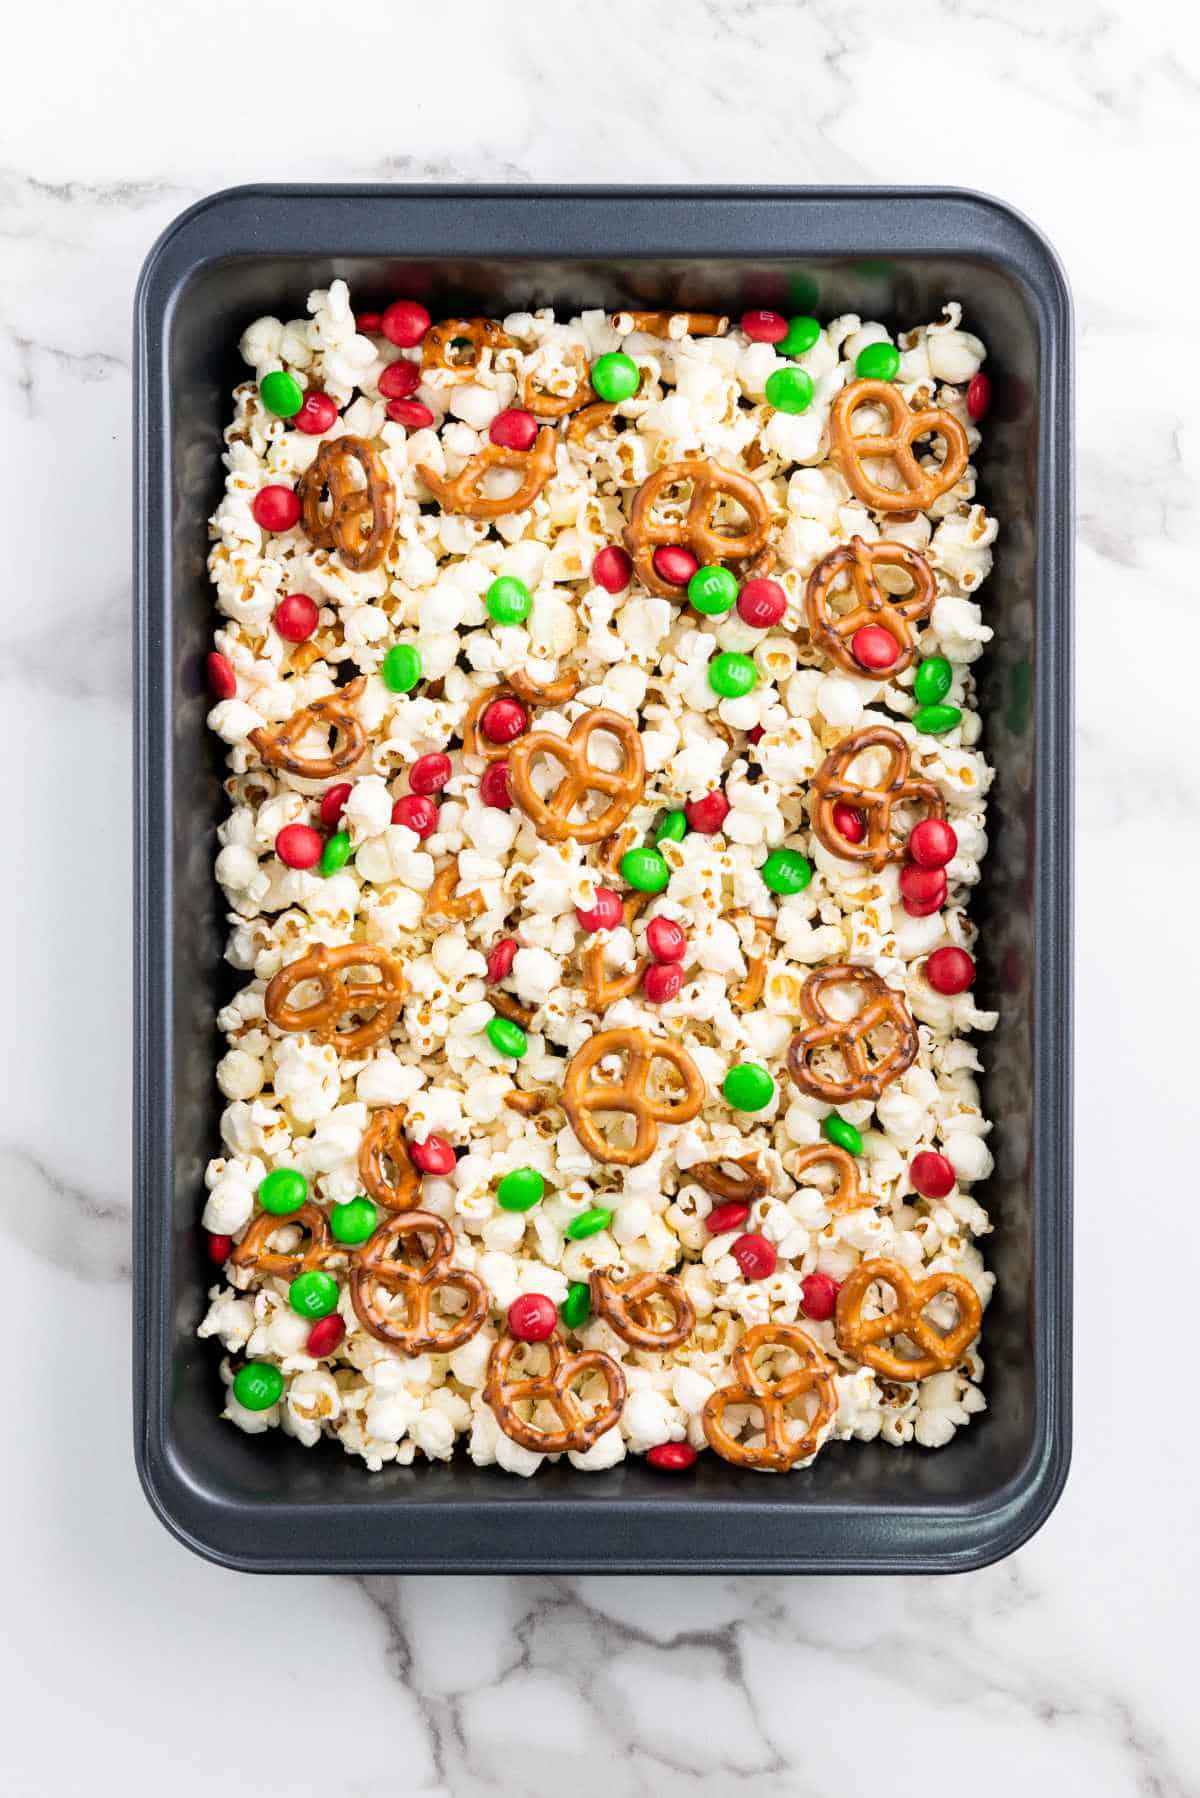 pretzel knots and holiday M&M's added to popcorn in a baking pan.